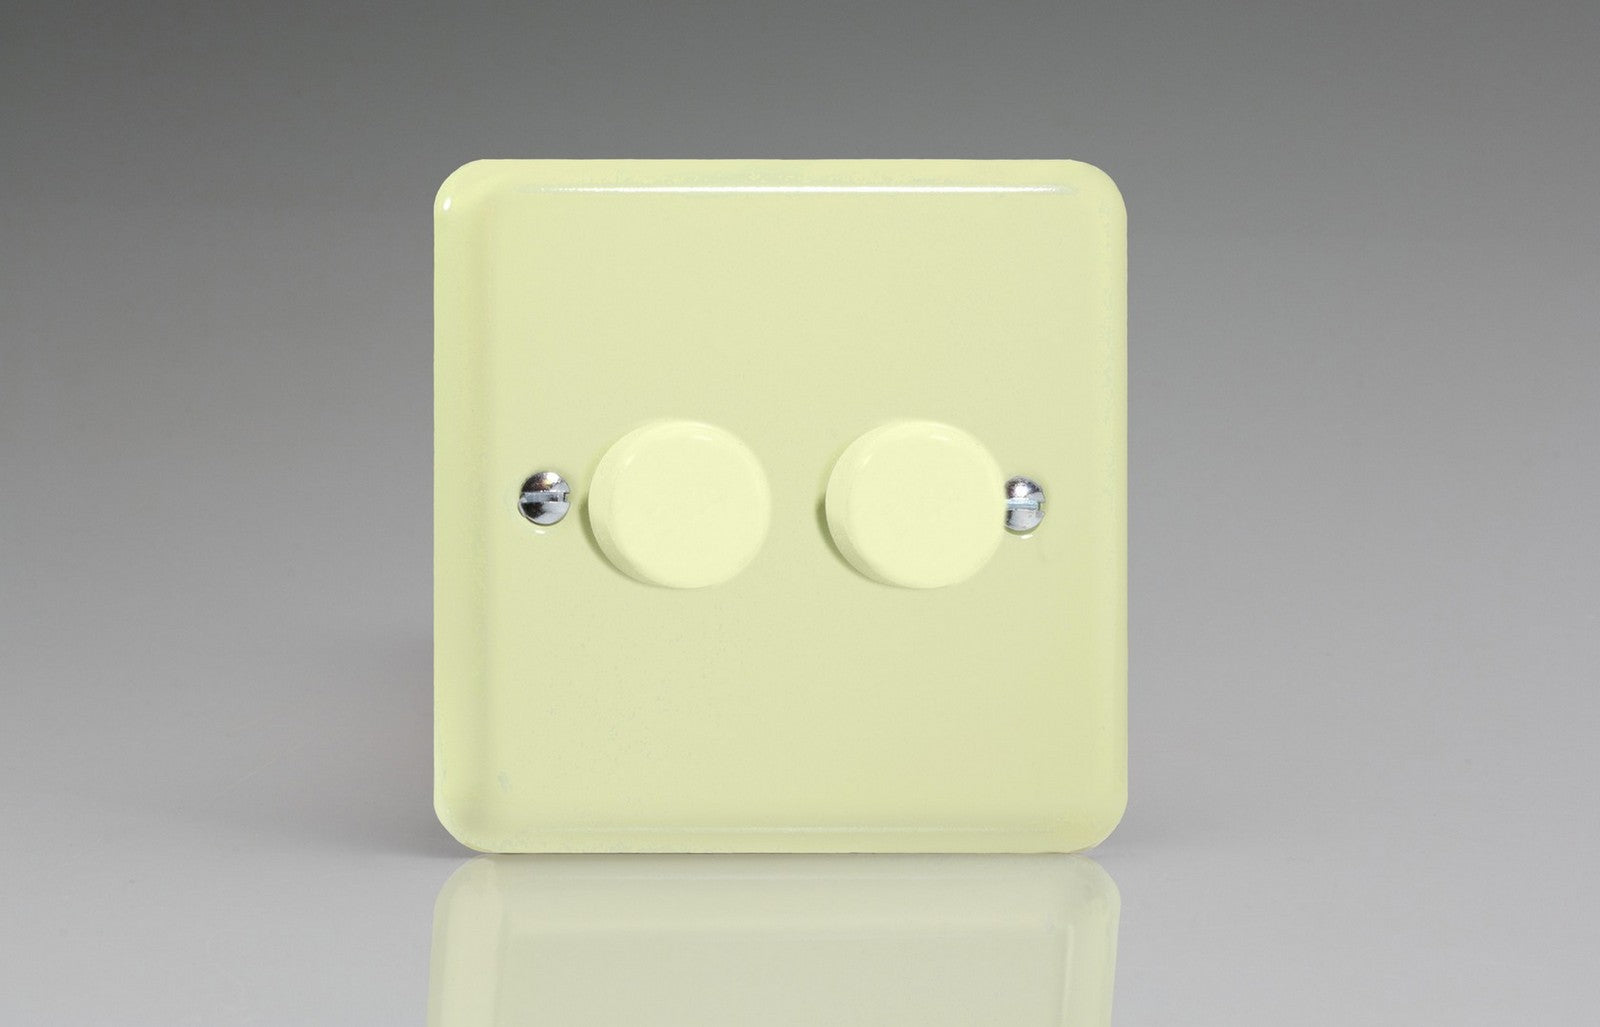 Varilight HY83.WC Lily White Chocolate 2-Gang 2-Way Push-On/Off Rotary Dimmer 2 x 60-400W